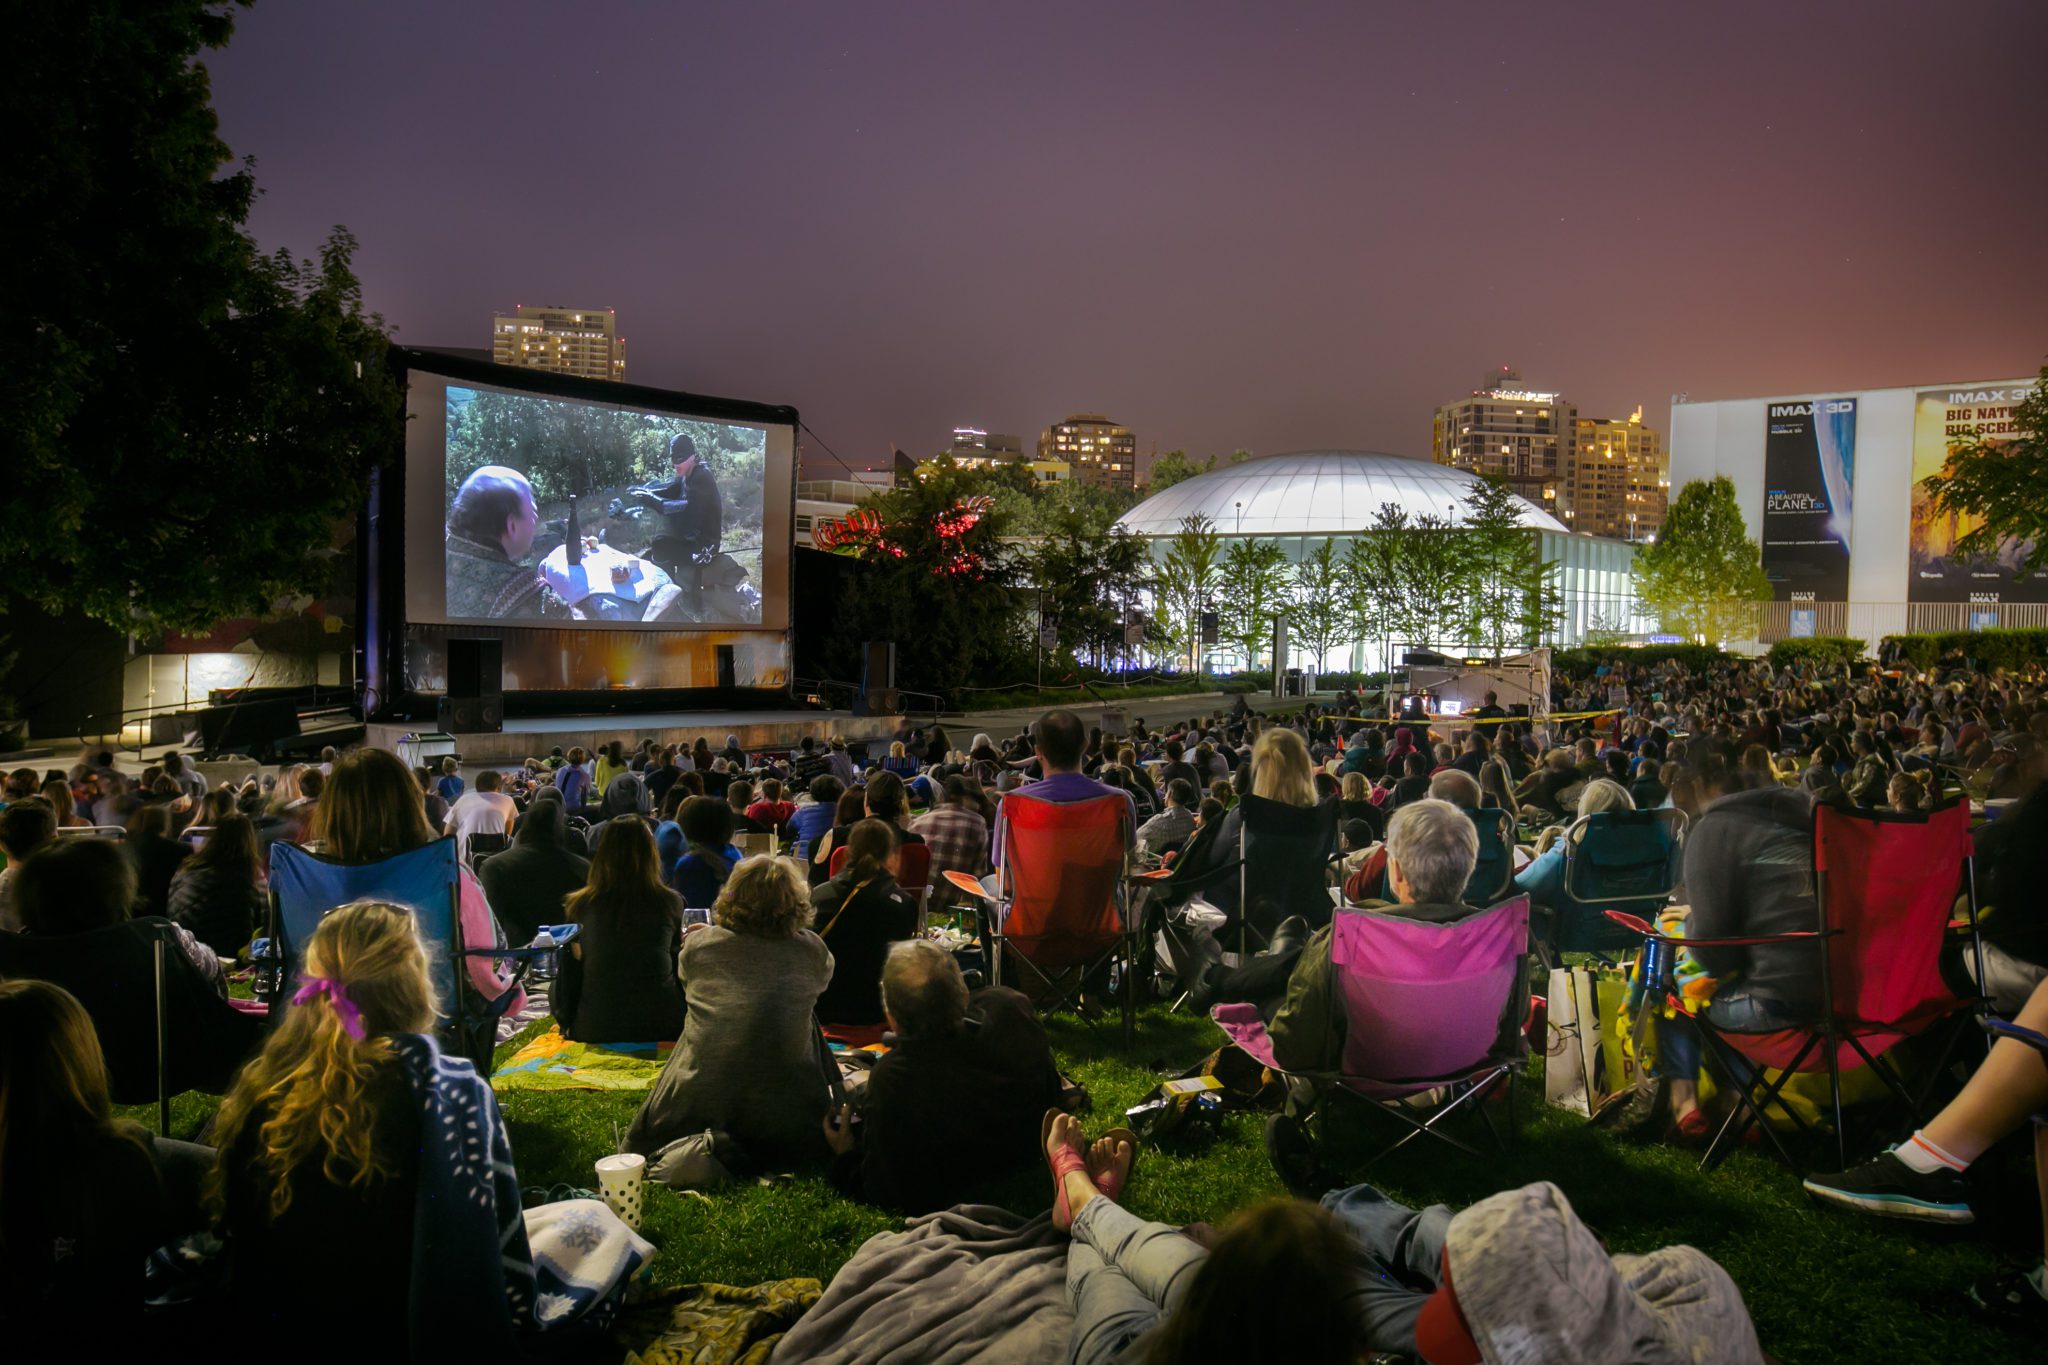 Outside movie screen, people sitting on blankets, chairs, grass, trees, buildings, night time